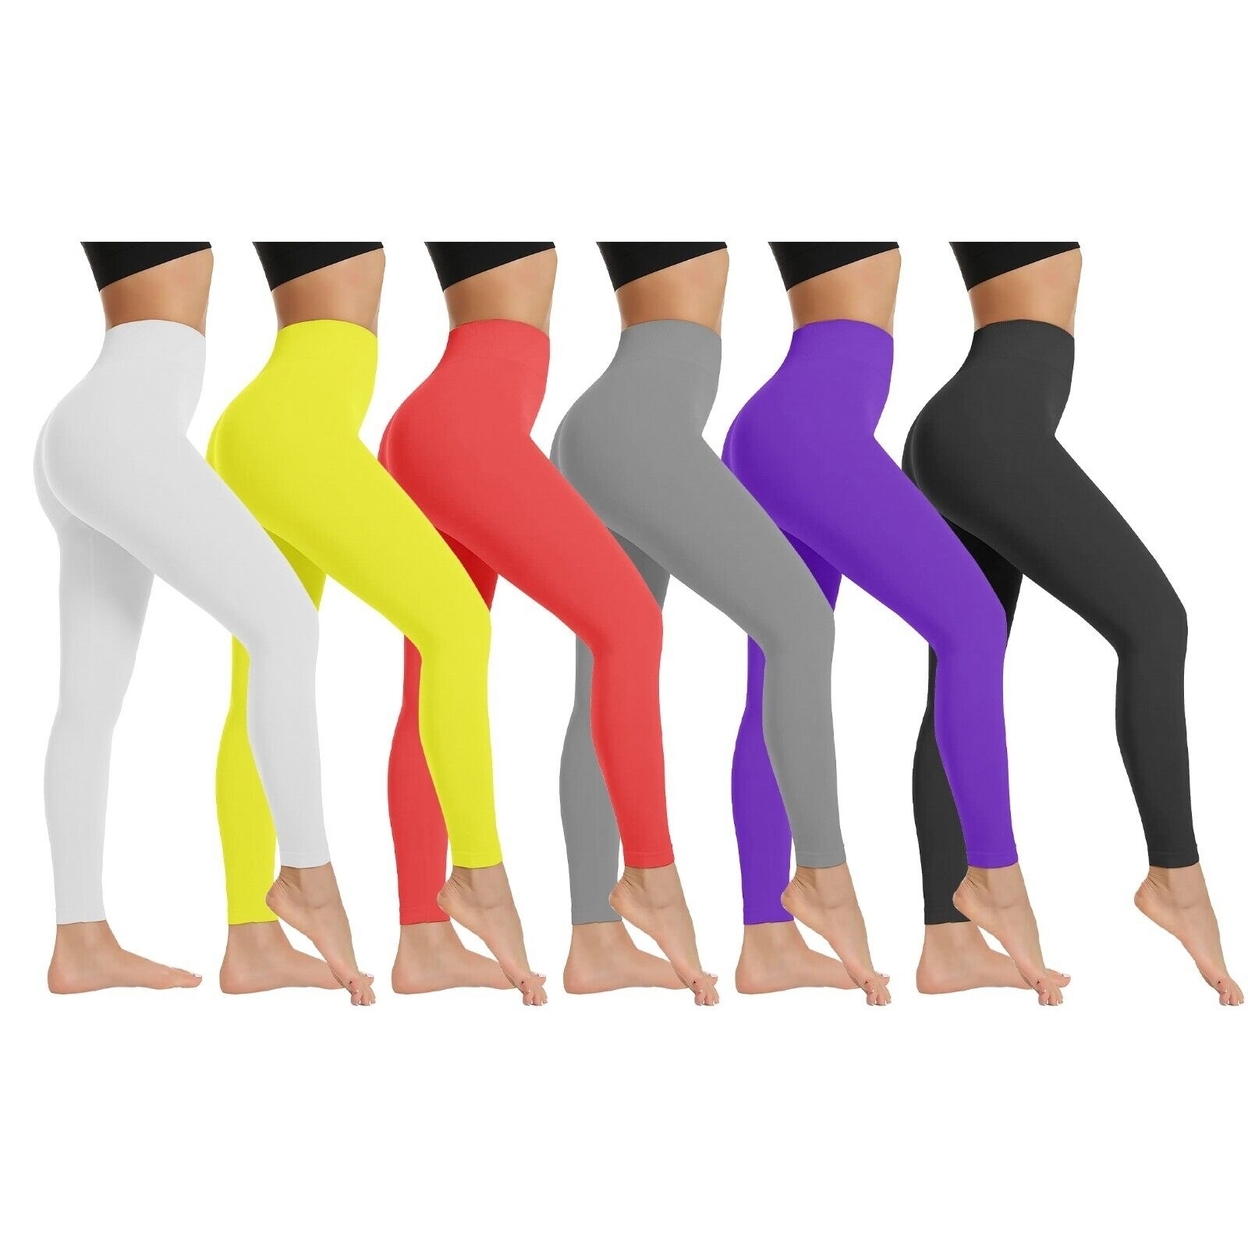 2-Pack: Women's High Waist Super Soft Active Athlete Stretch Yoga Cozy Leggings - Yellow & Red, Small